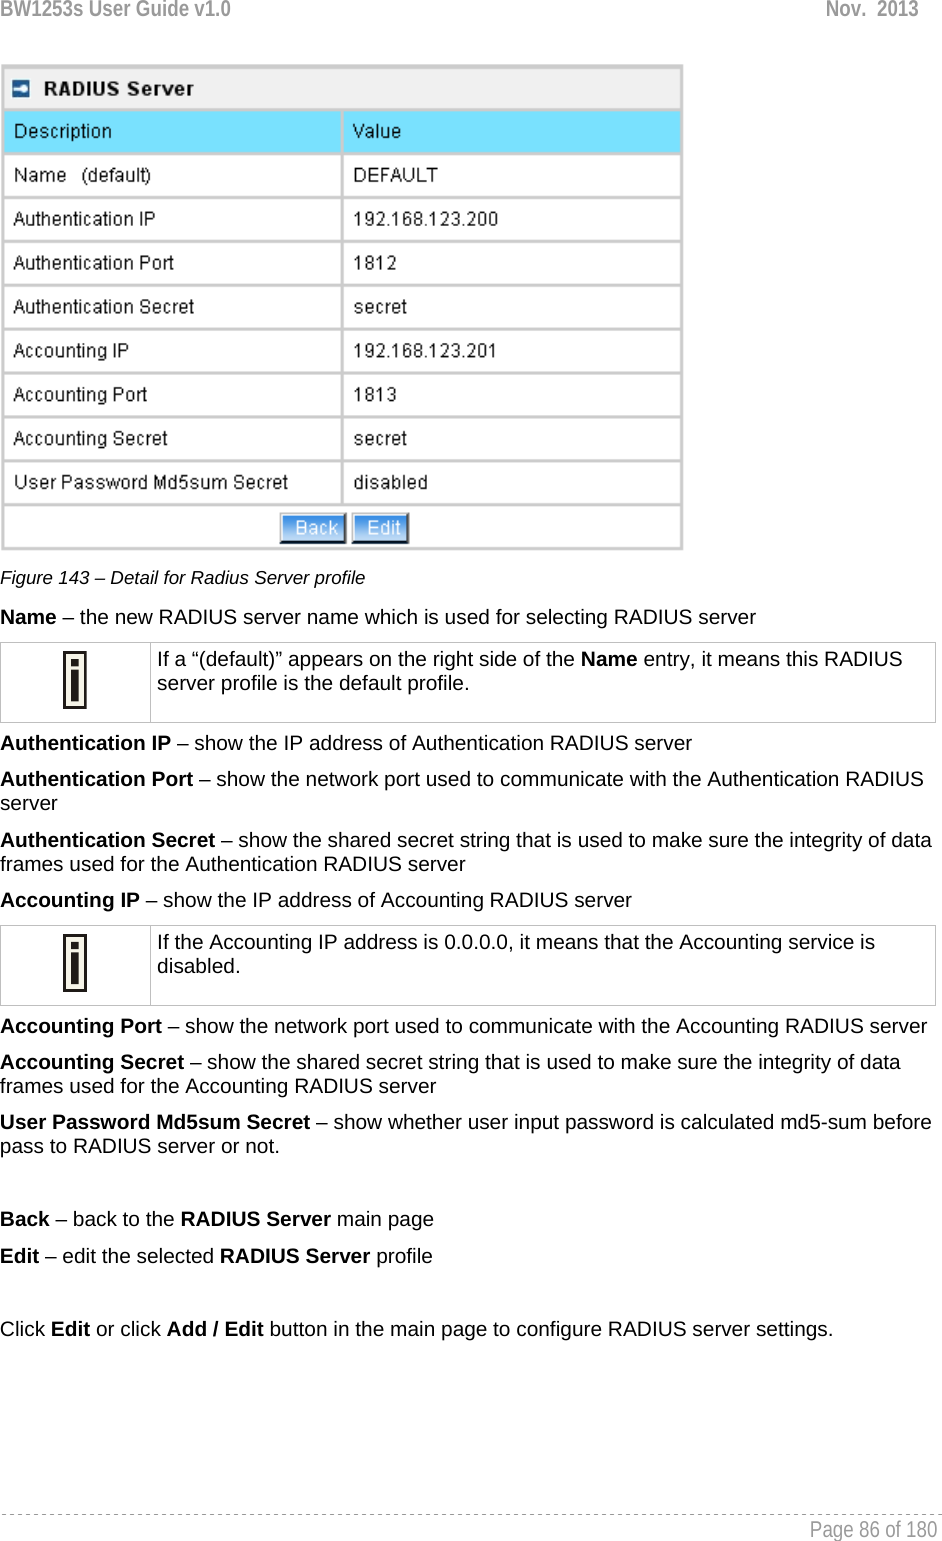 BW1253s User Guide v1.0  Nov.  2013     Page 86 of 180    Figure 143 – Detail for Radius Server profile Name – the new RADIUS server name which is used for selecting RADIUS server  If a “(default)” appears on the right side of the Name entry, it means this RADIUS server profile is the default profile. Authentication IP – show the IP address of Authentication RADIUS server Authentication Port – show the network port used to communicate with the Authentication RADIUS server Authentication Secret – show the shared secret string that is used to make sure the integrity of data frames used for the Authentication RADIUS server Accounting IP – show the IP address of Accounting RADIUS server  If the Accounting IP address is 0.0.0.0, it means that the Accounting service is disabled. Accounting Port – show the network port used to communicate with the Accounting RADIUS server Accounting Secret – show the shared secret string that is used to make sure the integrity of data frames used for the Accounting RADIUS server User Password Md5sum Secret – show whether user input password is calculated md5-sum before pass to RADIUS server or not.  Back – back to the RADIUS Server main page Edit – edit the selected RADIUS Server profile  Click Edit or click Add / Edit button in the main page to configure RADIUS server settings. 